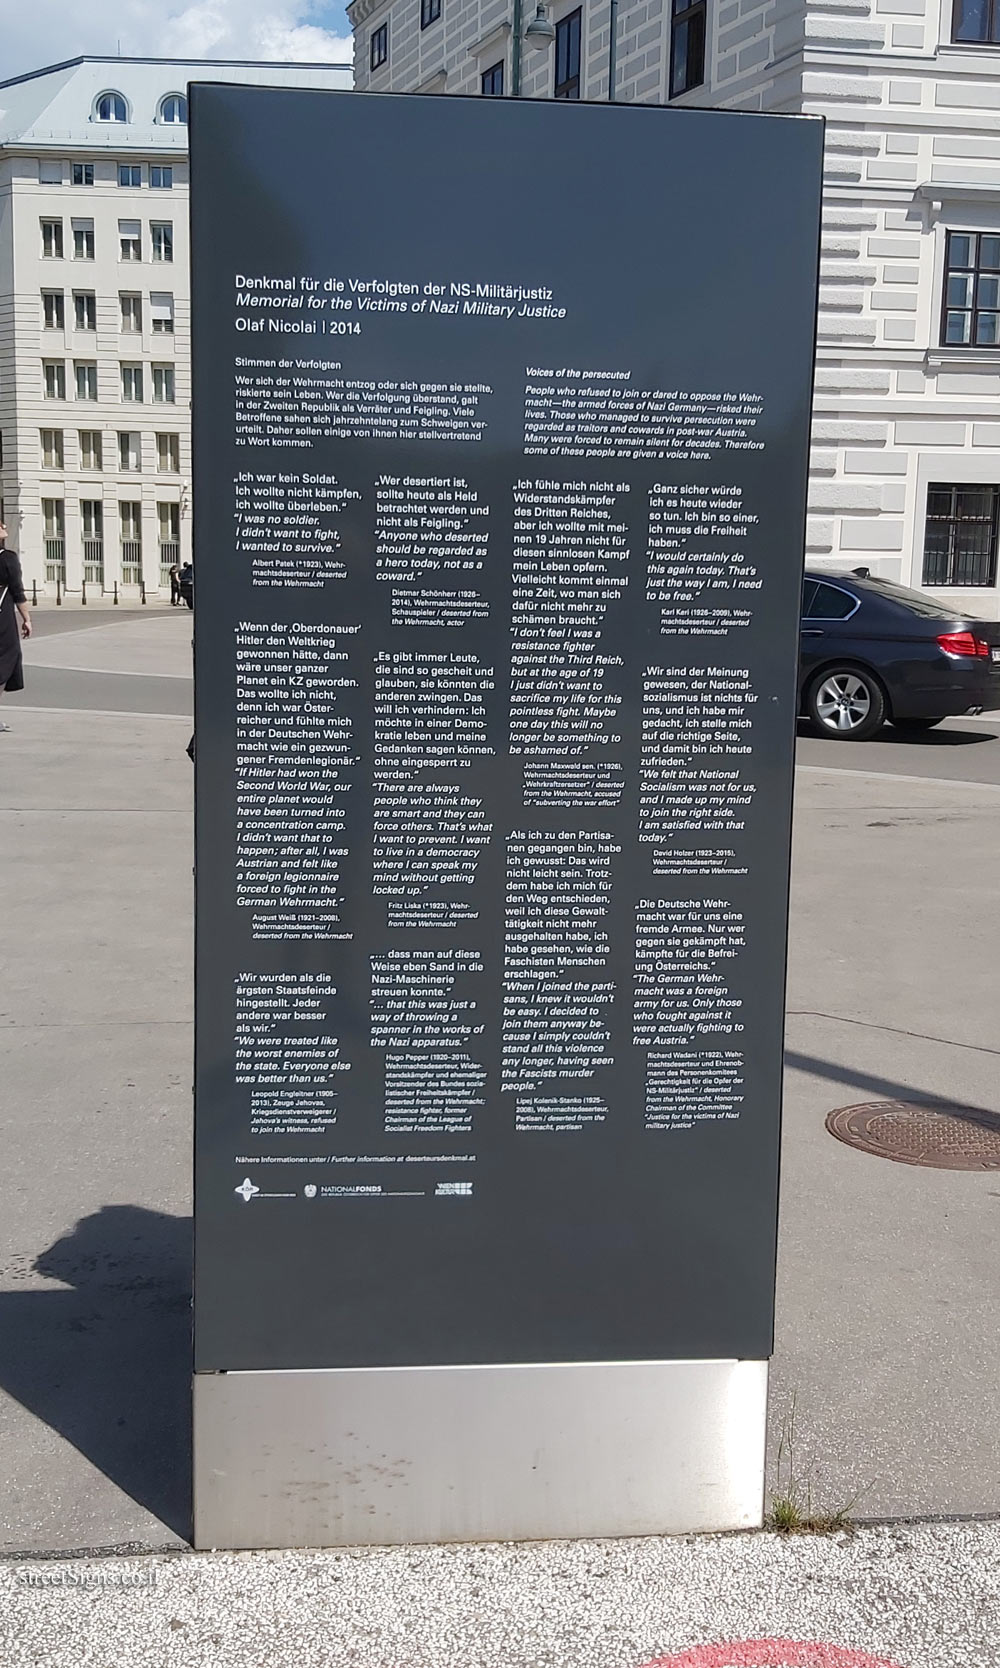 Vienna - A monument in memory of the victims of the Nazi military justice system - Ballhauspl. 2, 1010 Wien, Austria